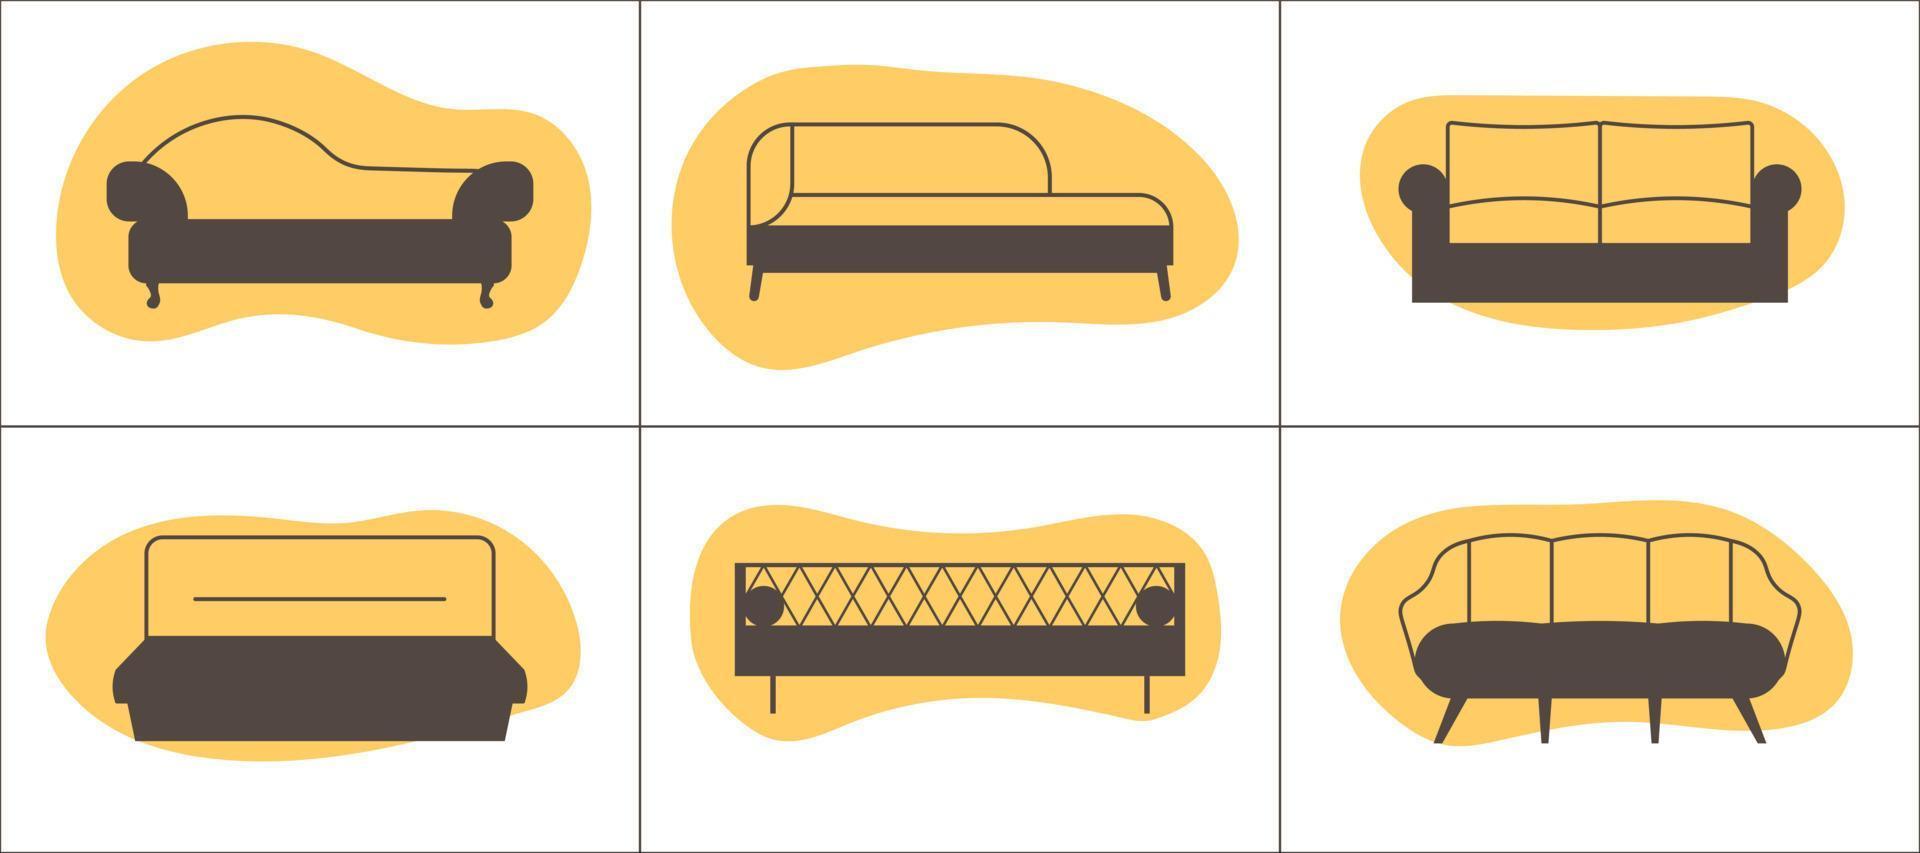 Sofa icons set. Six furniture outline icons on abstract shapes backgrounds vector